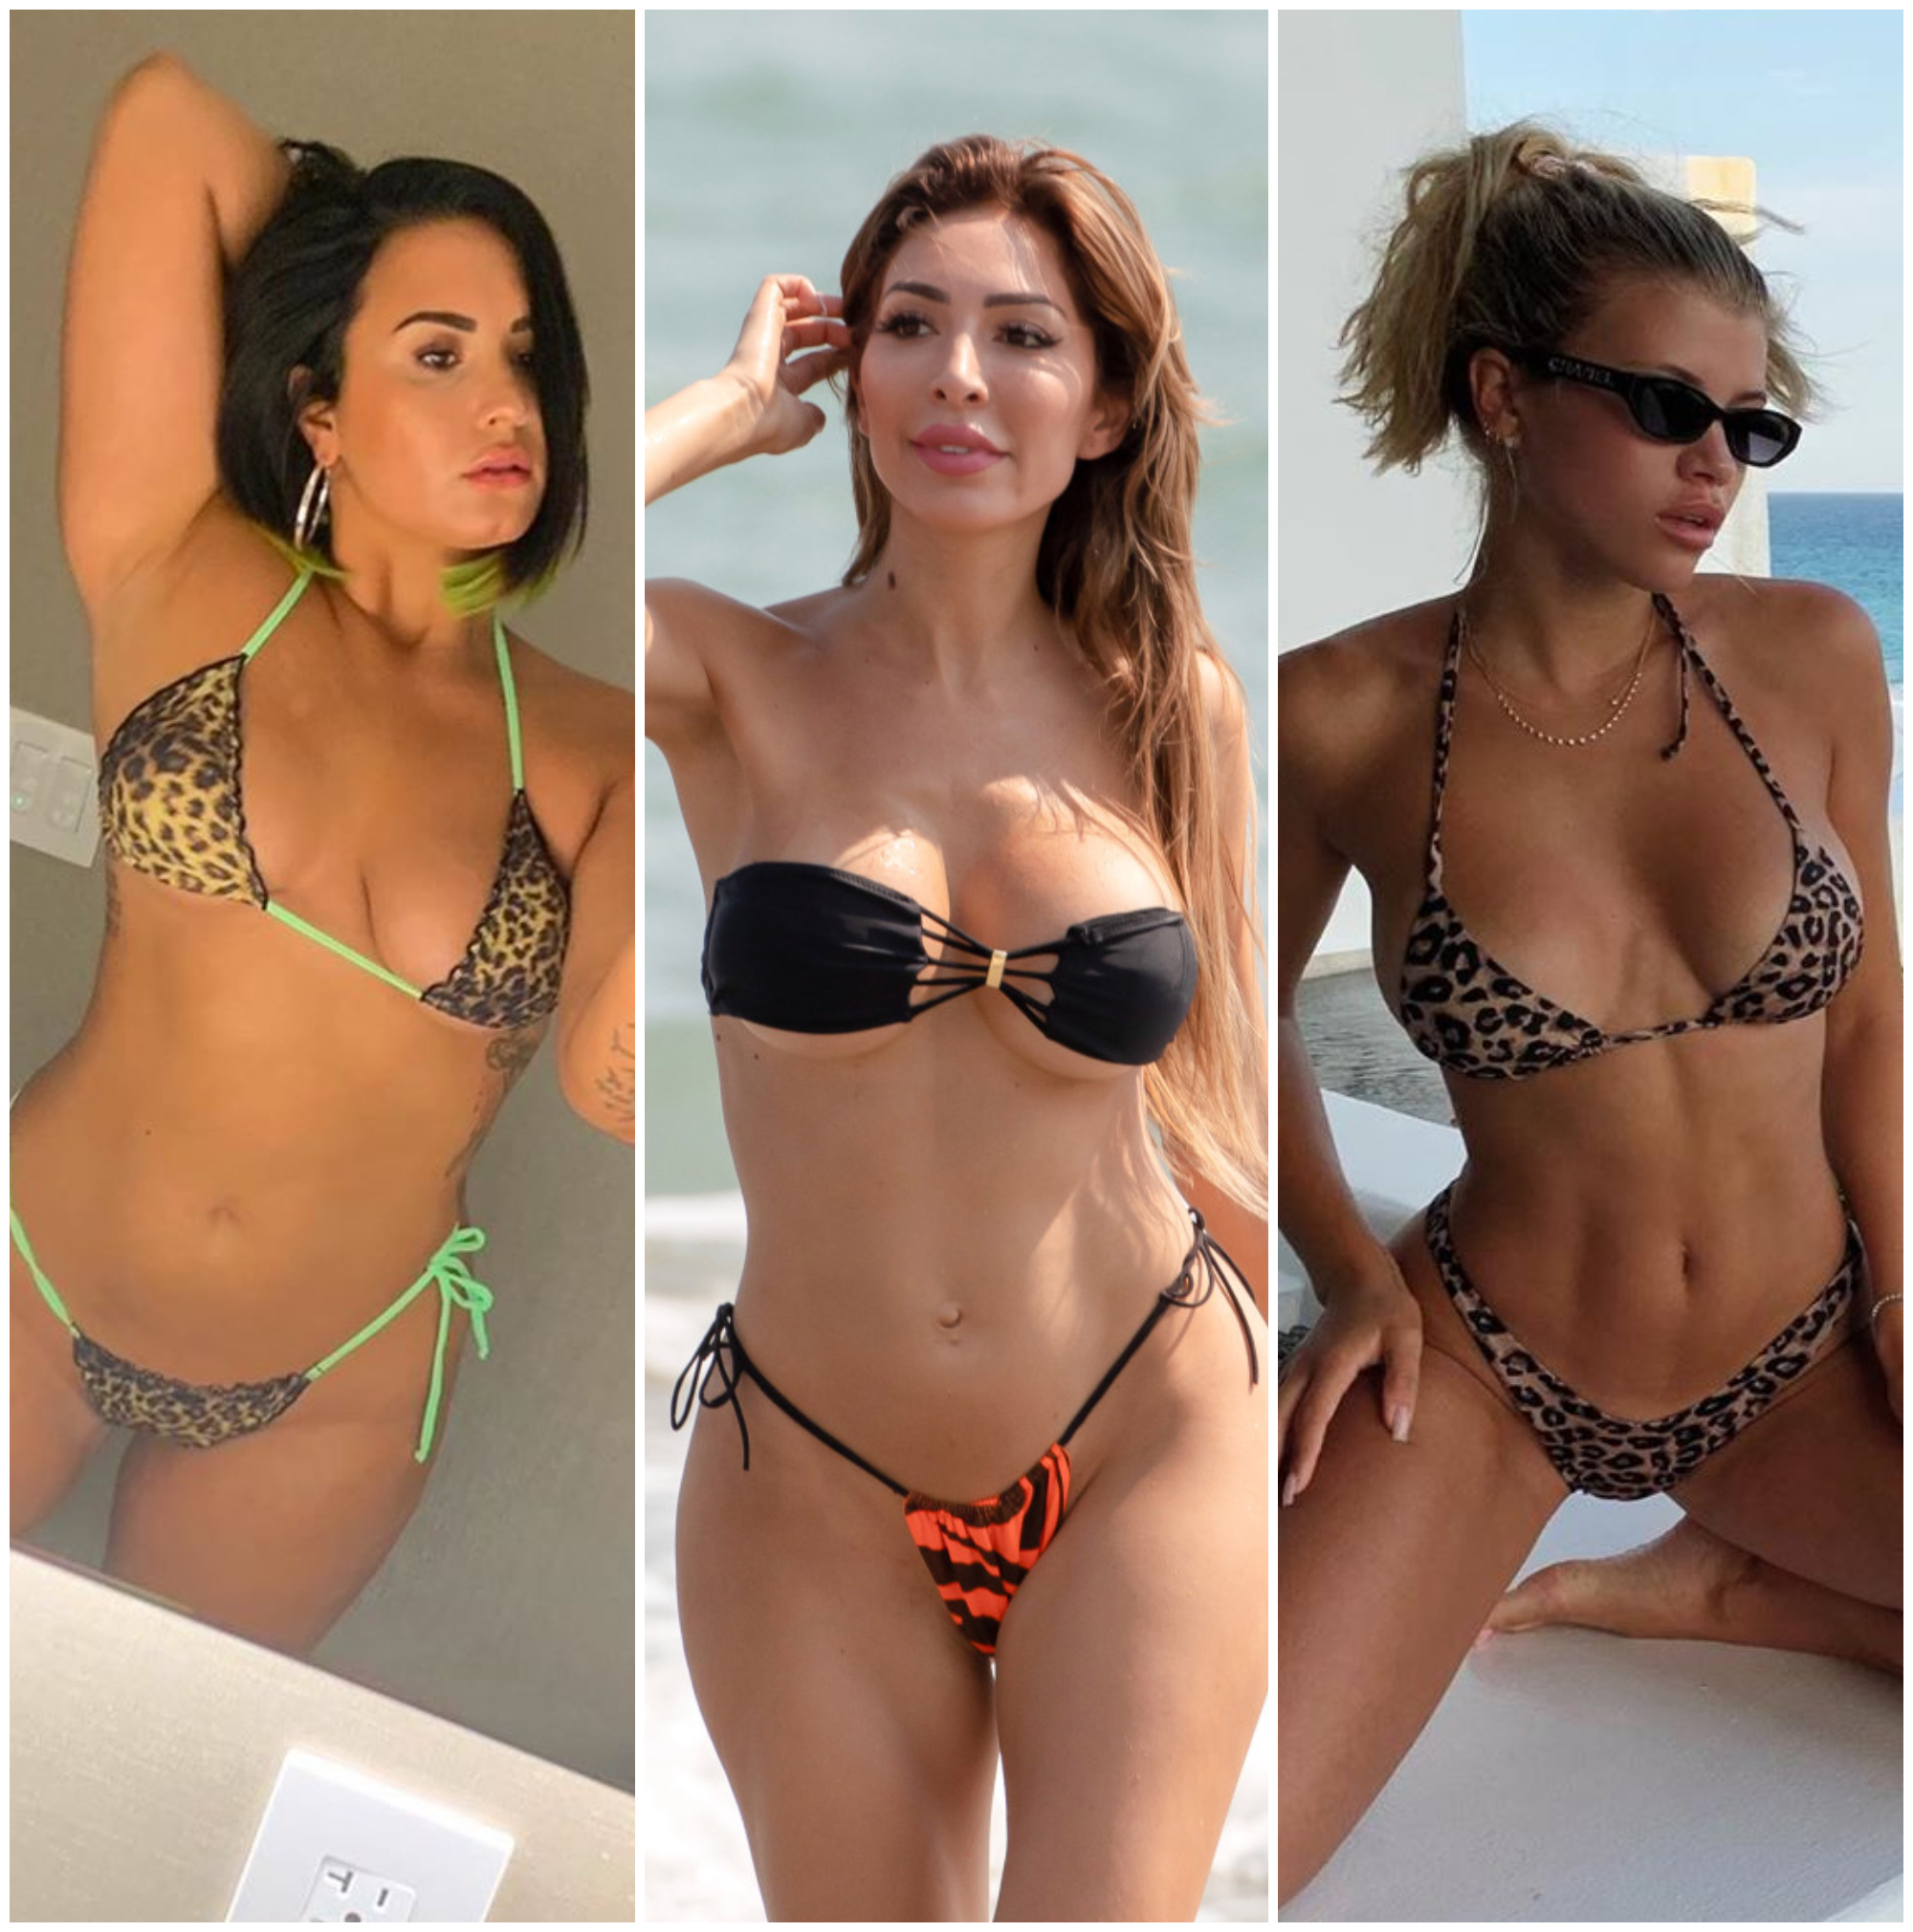 Recyclen vloeiend Kerstmis Sexy Bikini Photos of Celebrities From Summer: Demi Lovato and More